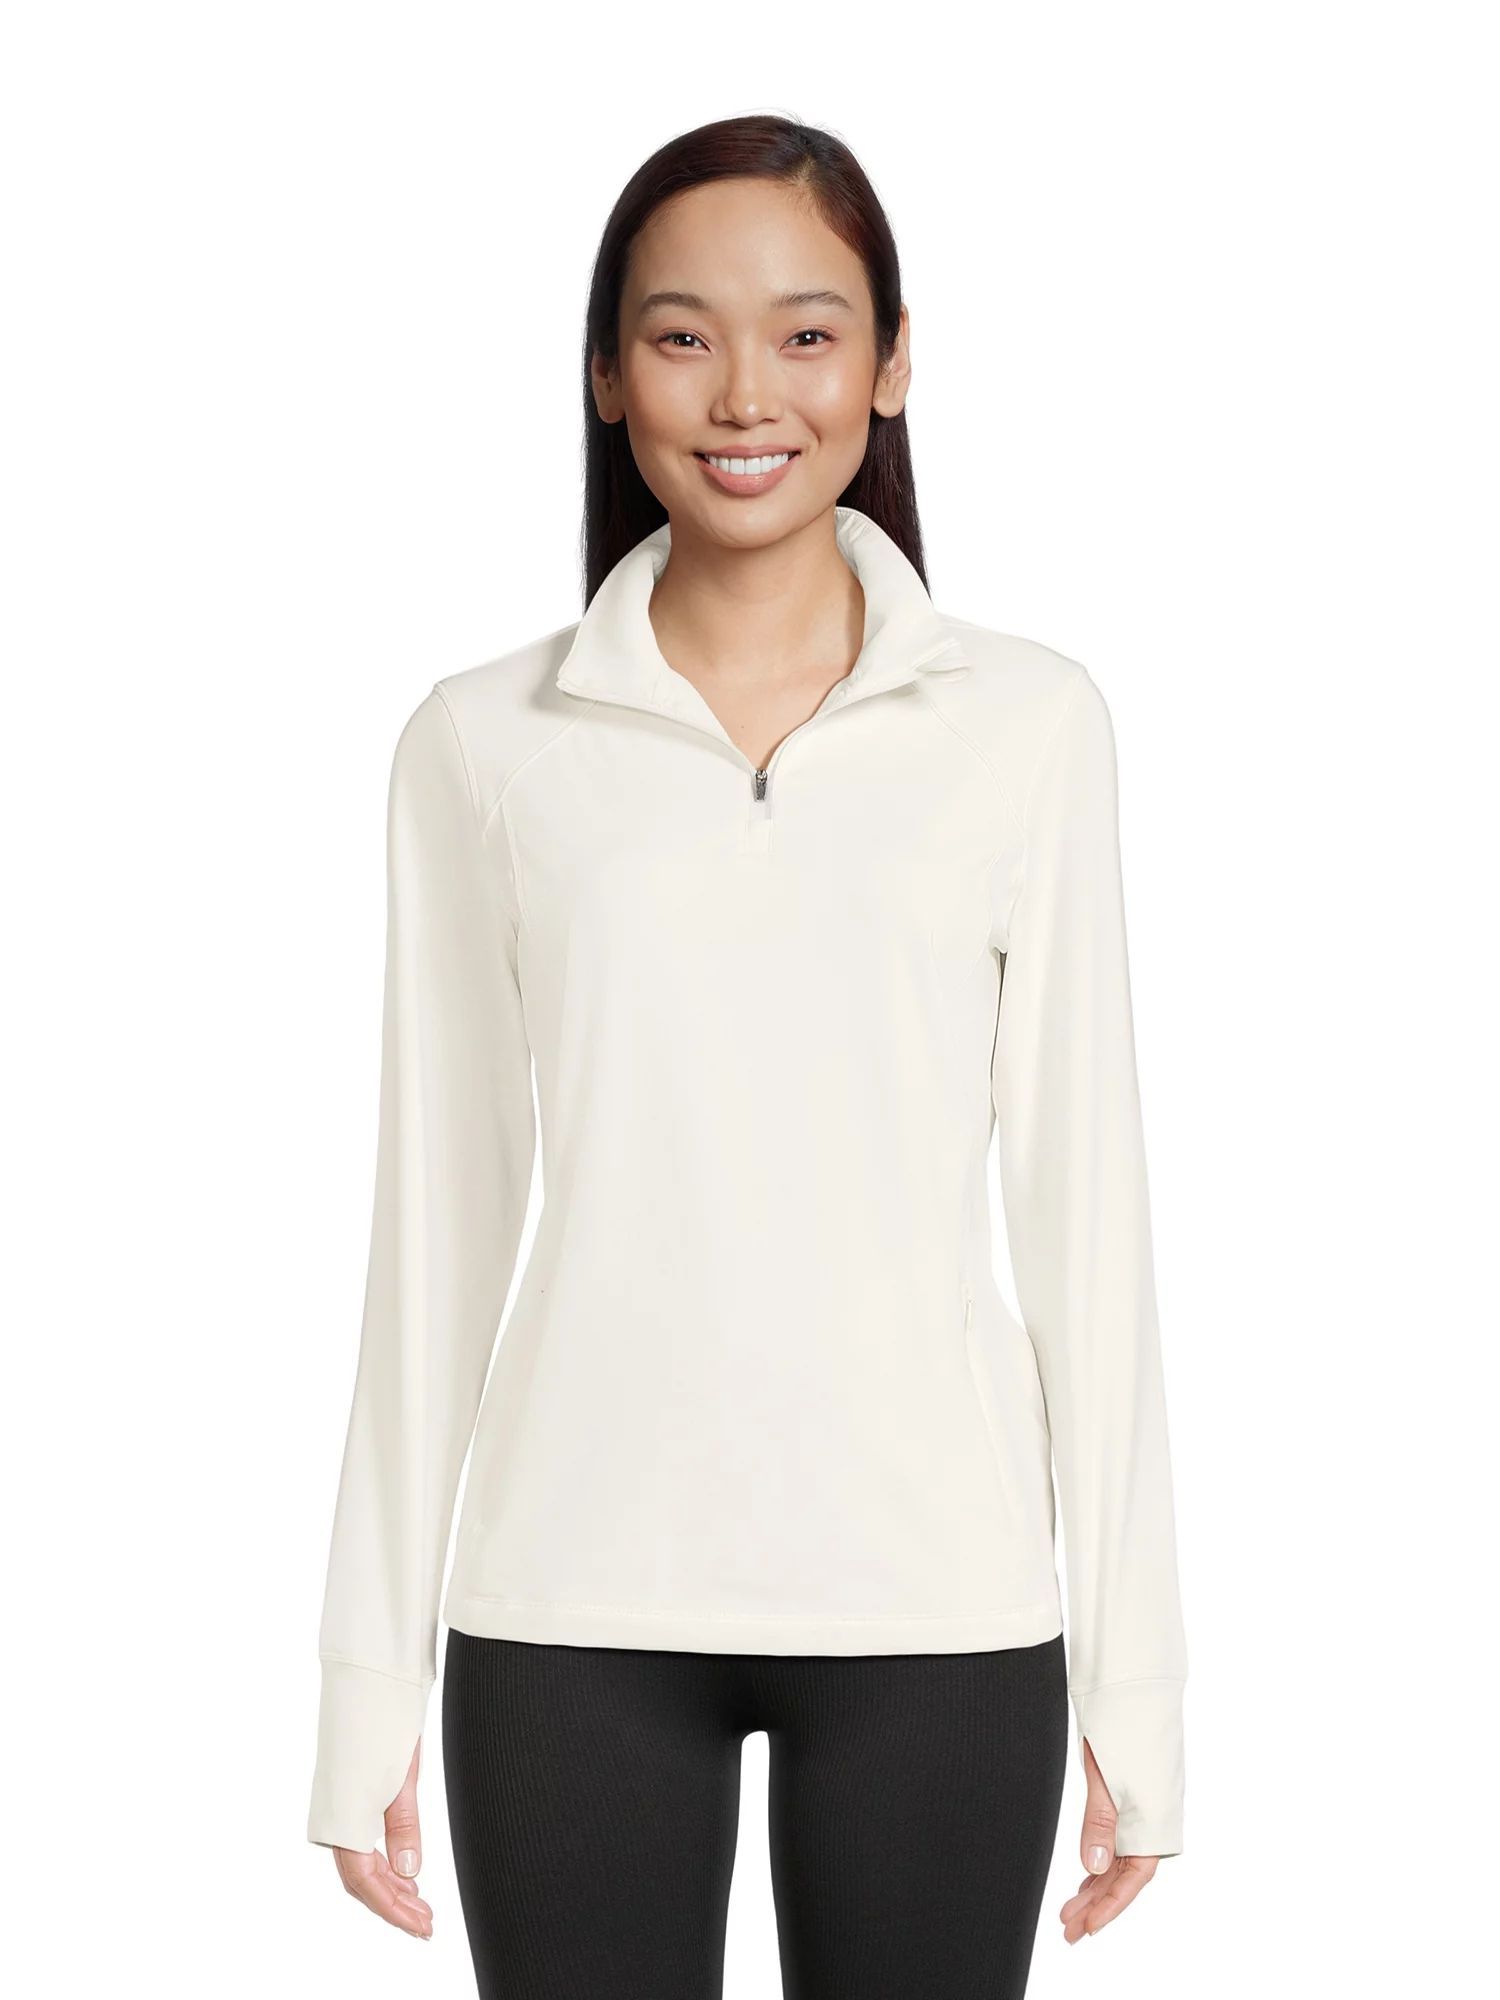 Avia Women’s Brushed Quarter-Zip Pullover with Pockets, Sizes XS-3X | Walmart (US)